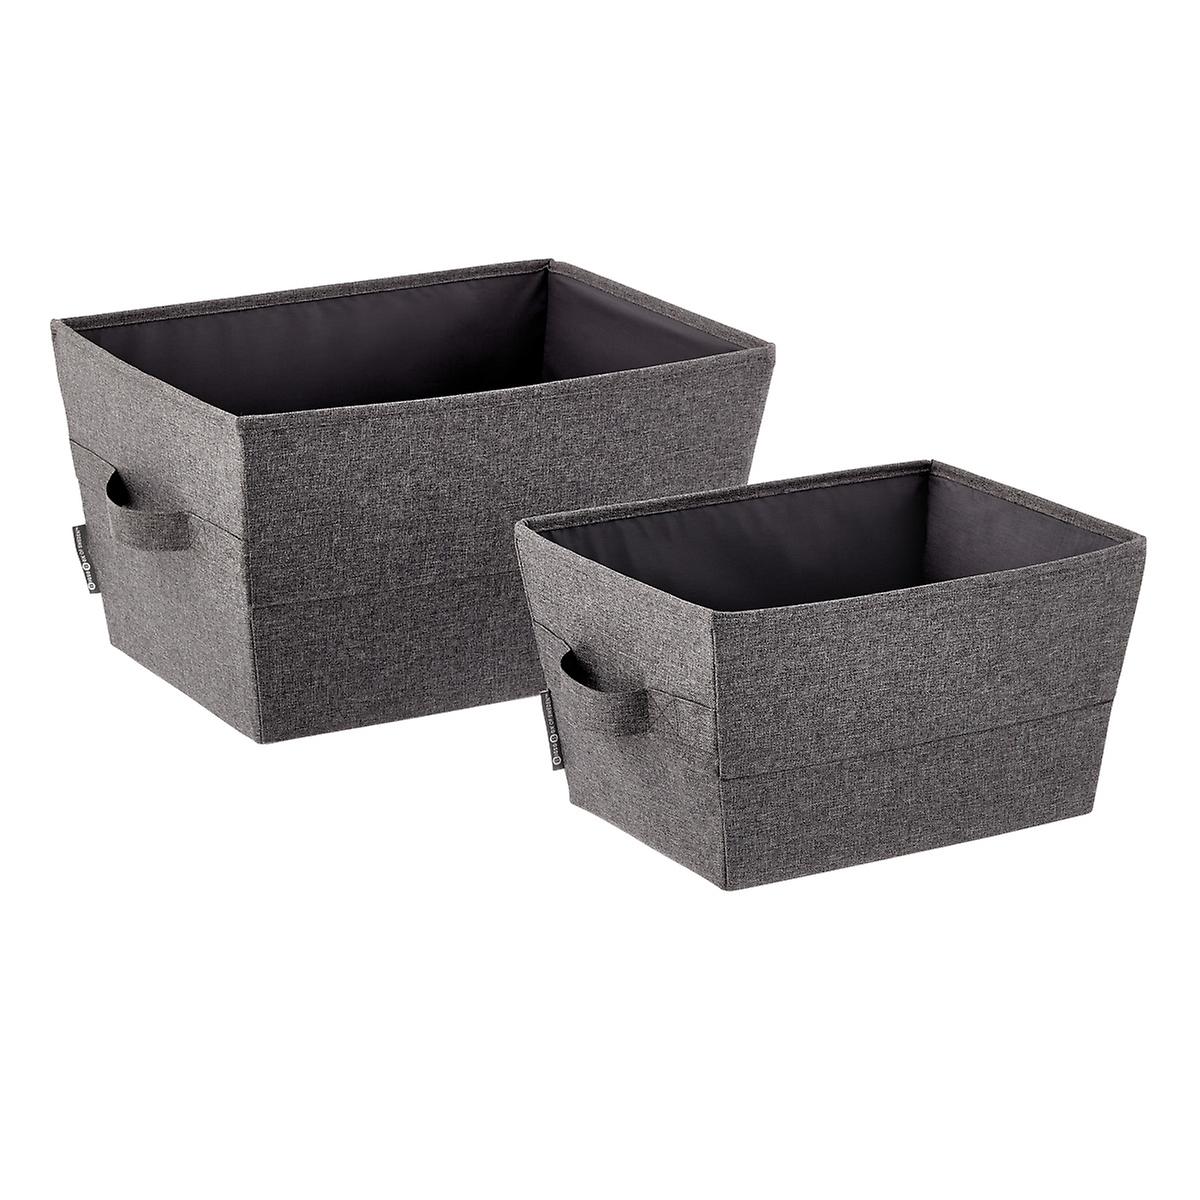 Bigso Collapsible Fabric Bin | The Container Store